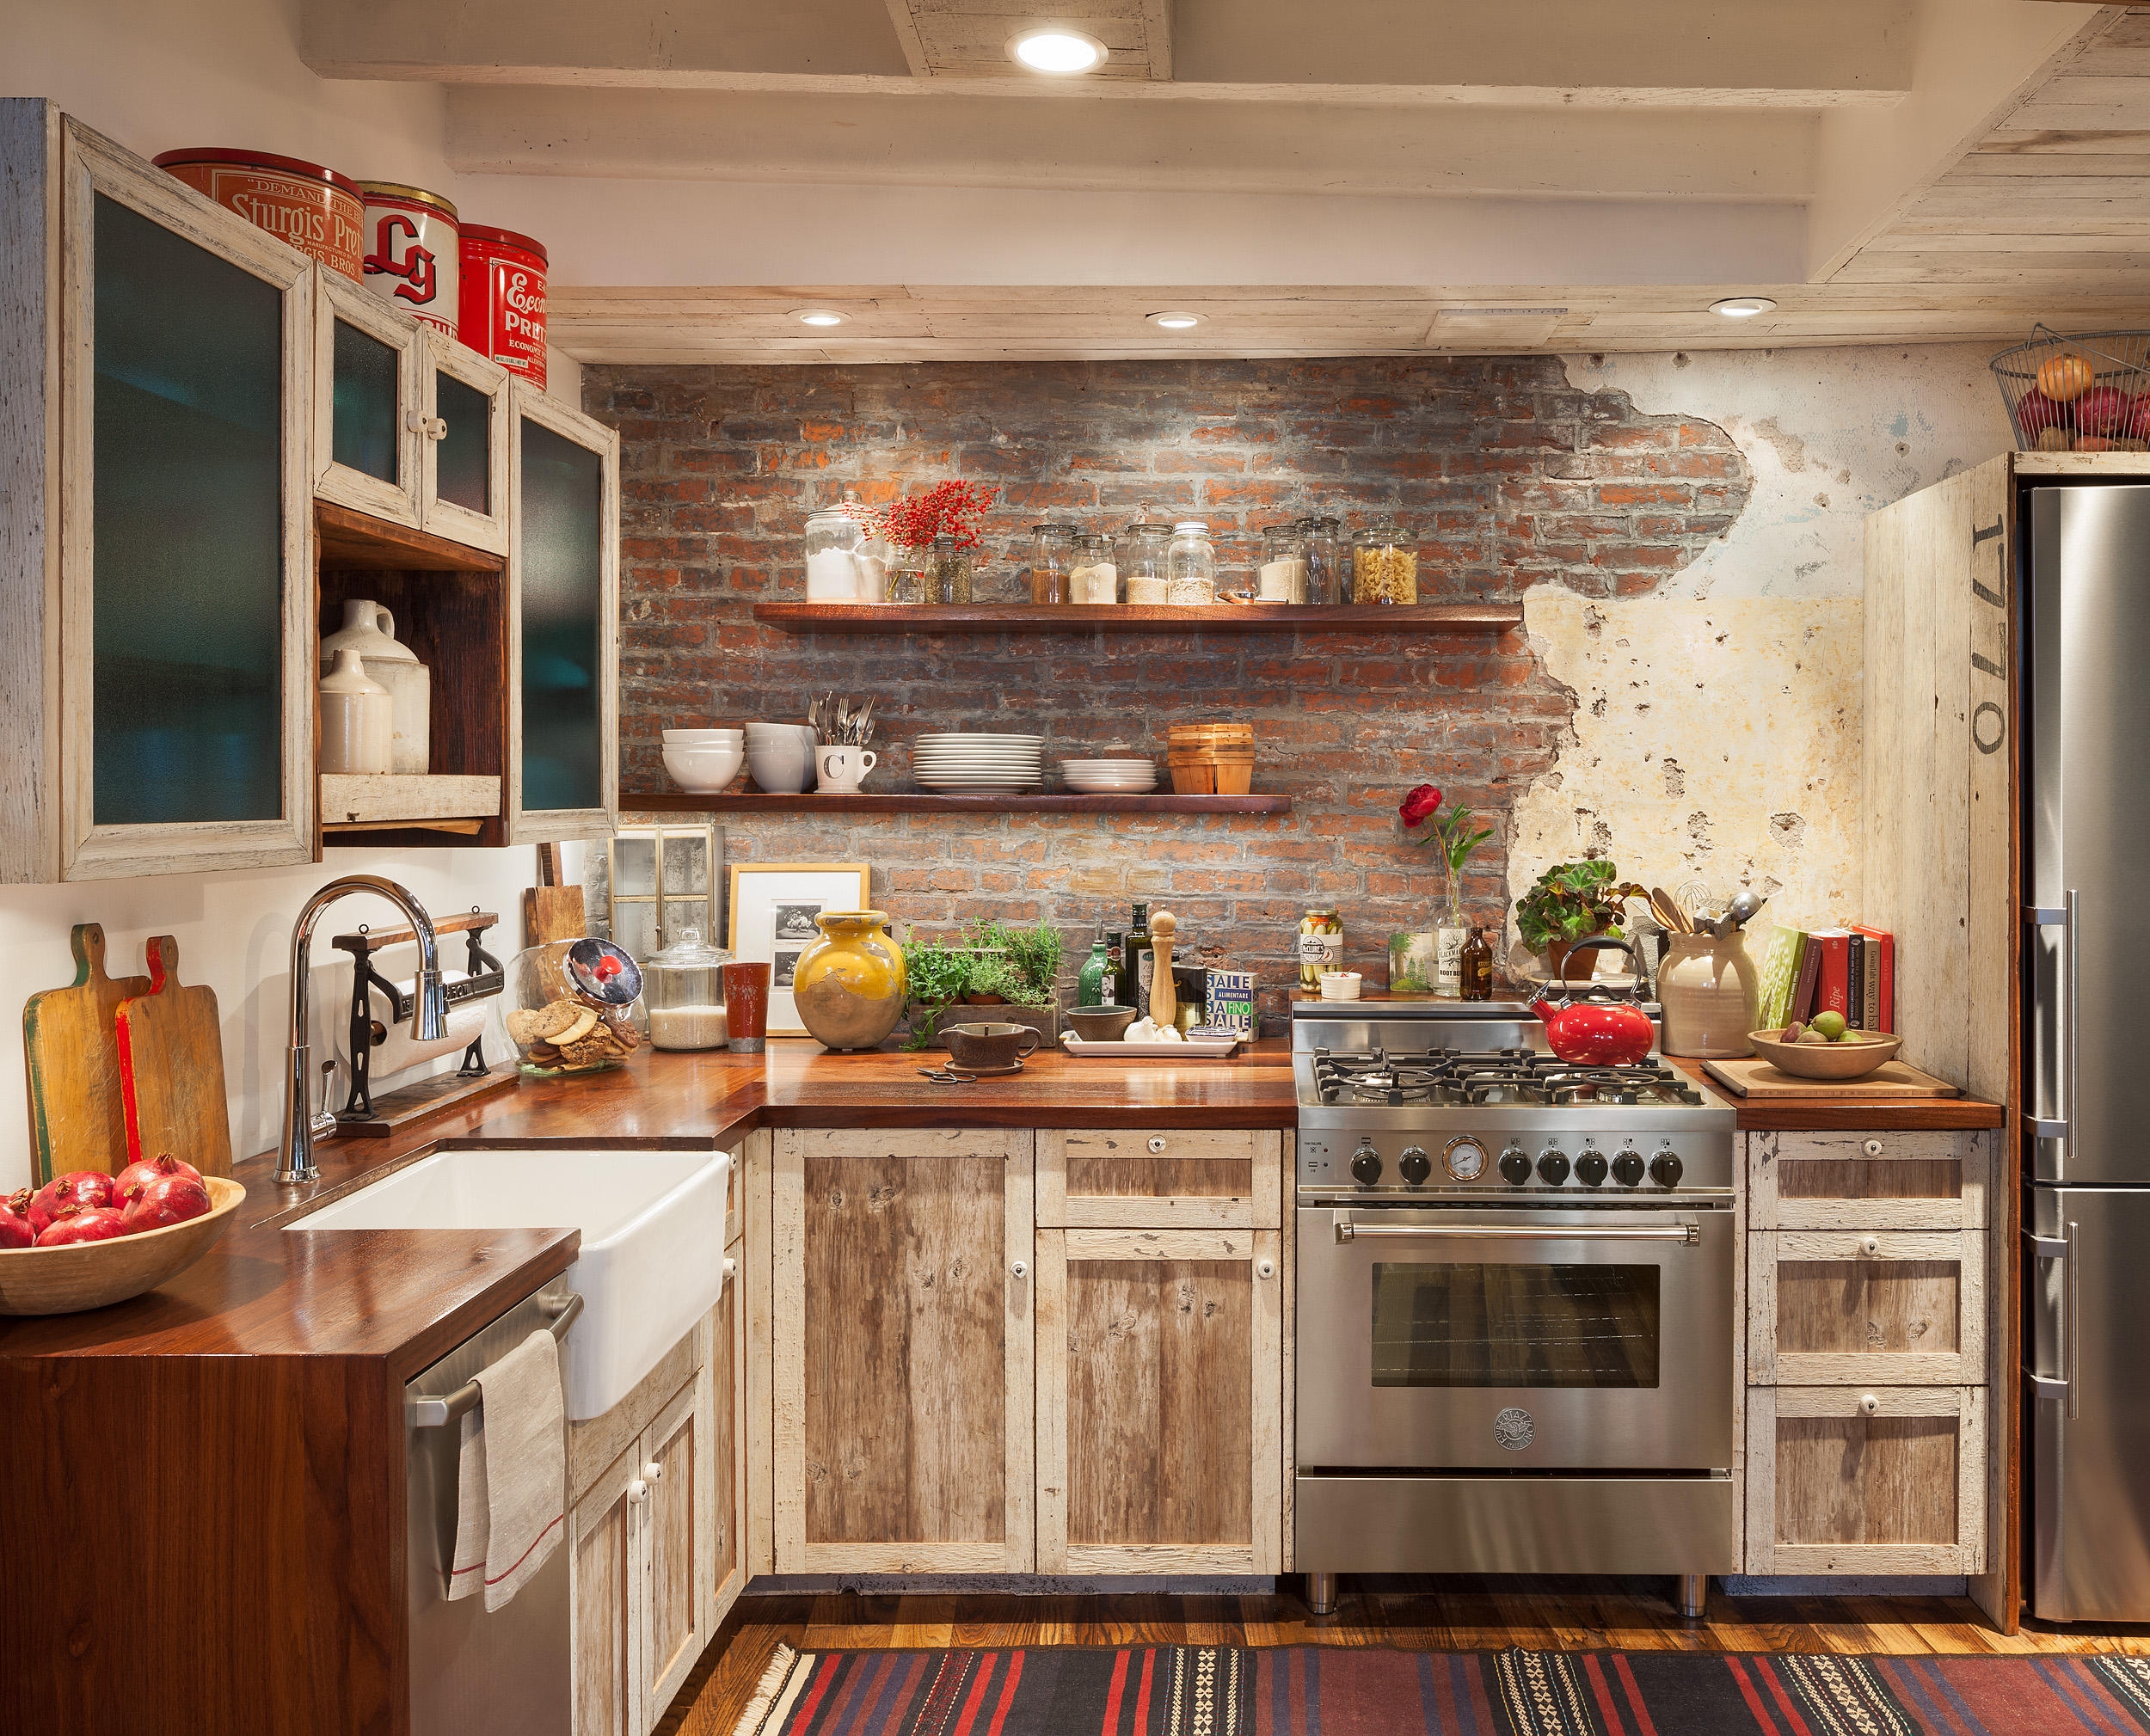 8 Modern Rustic kitchen Ideas That Are Full of Charm